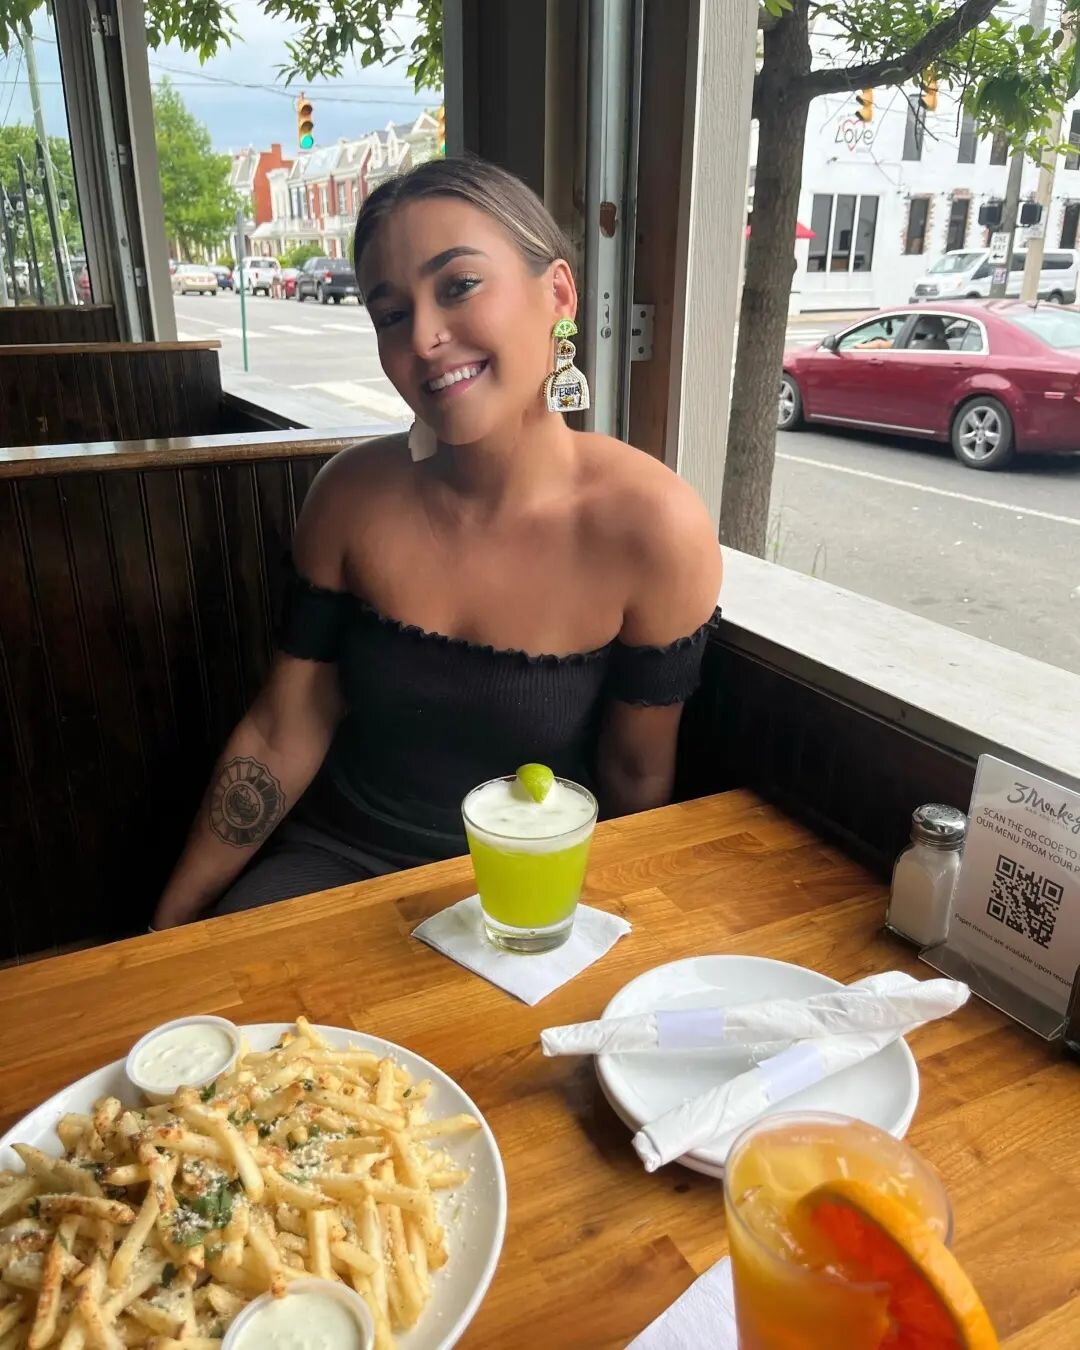 Fiesta all day, siesta all night 😎
HAPPY CINCO DE MAYO, Y'ALL!

@braxton need company on the patio

Join her for some Garlic Cilantro Fries and a tequila sunrise or a margarita

AS ALWAYS happy is 4-8❤️🤍💚